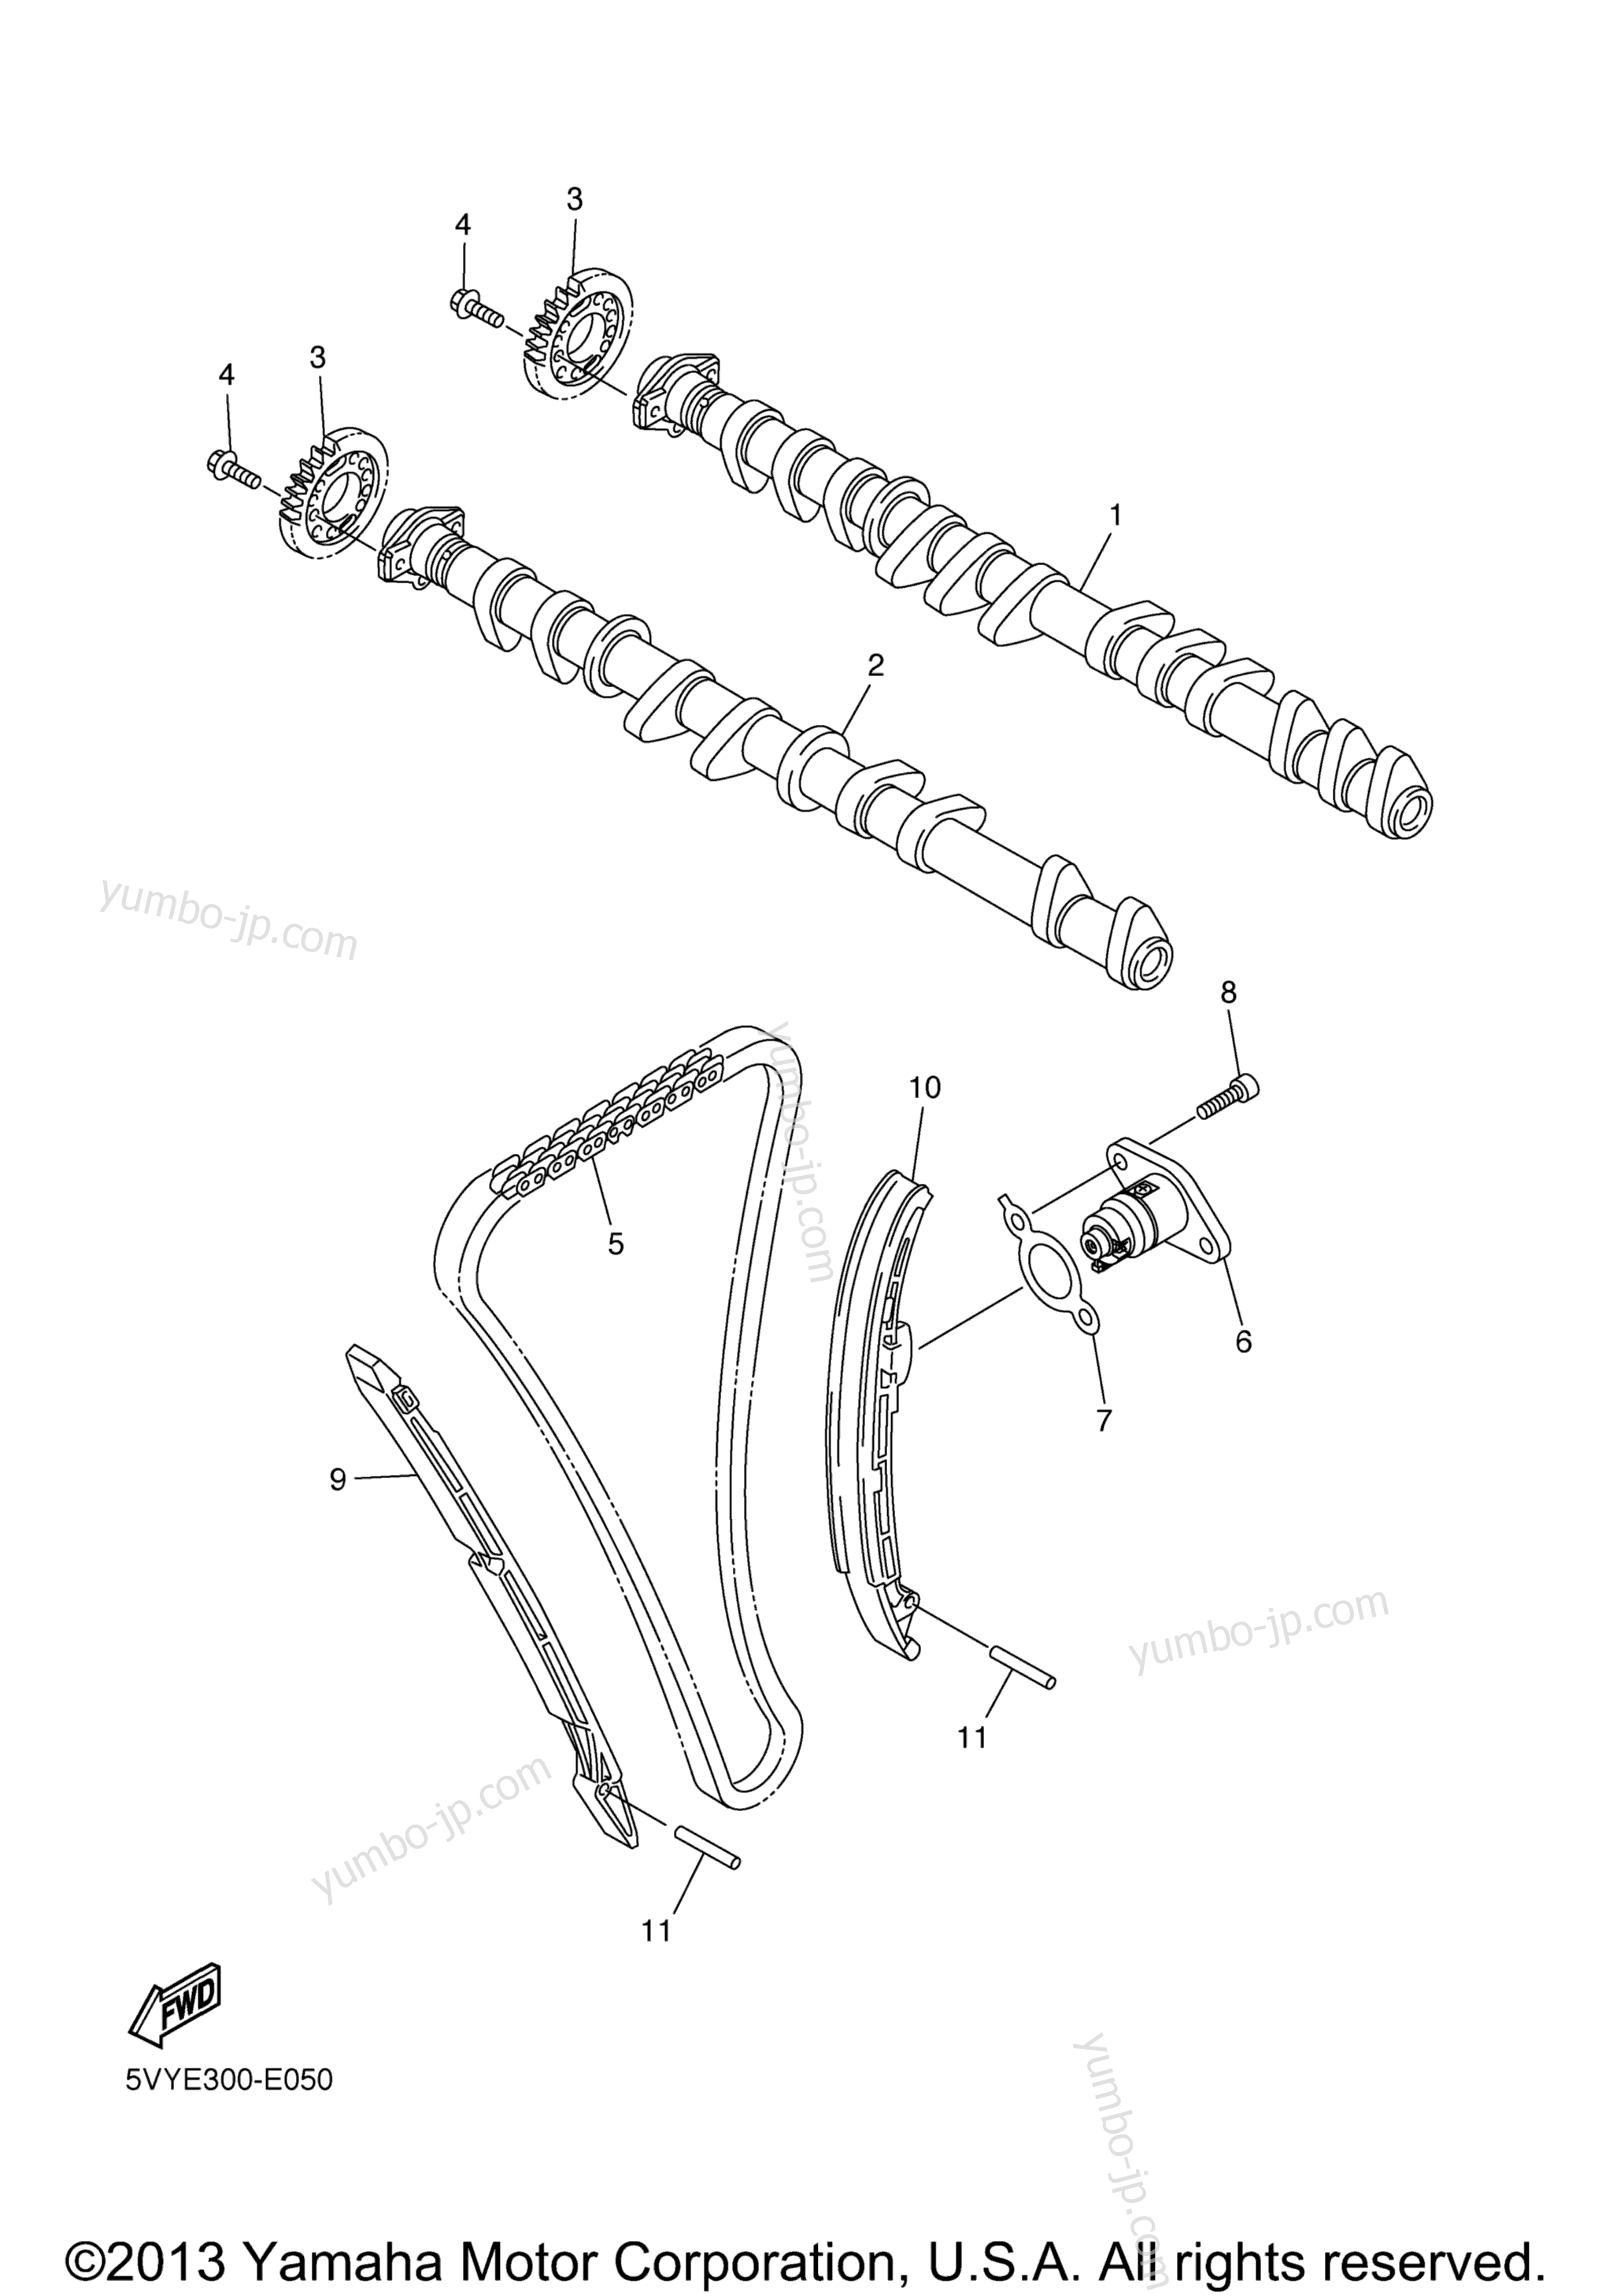 Camshaft Chain for motorcycles YAMAHA FZ-1 CA (FZS10VC) CA 2006 year